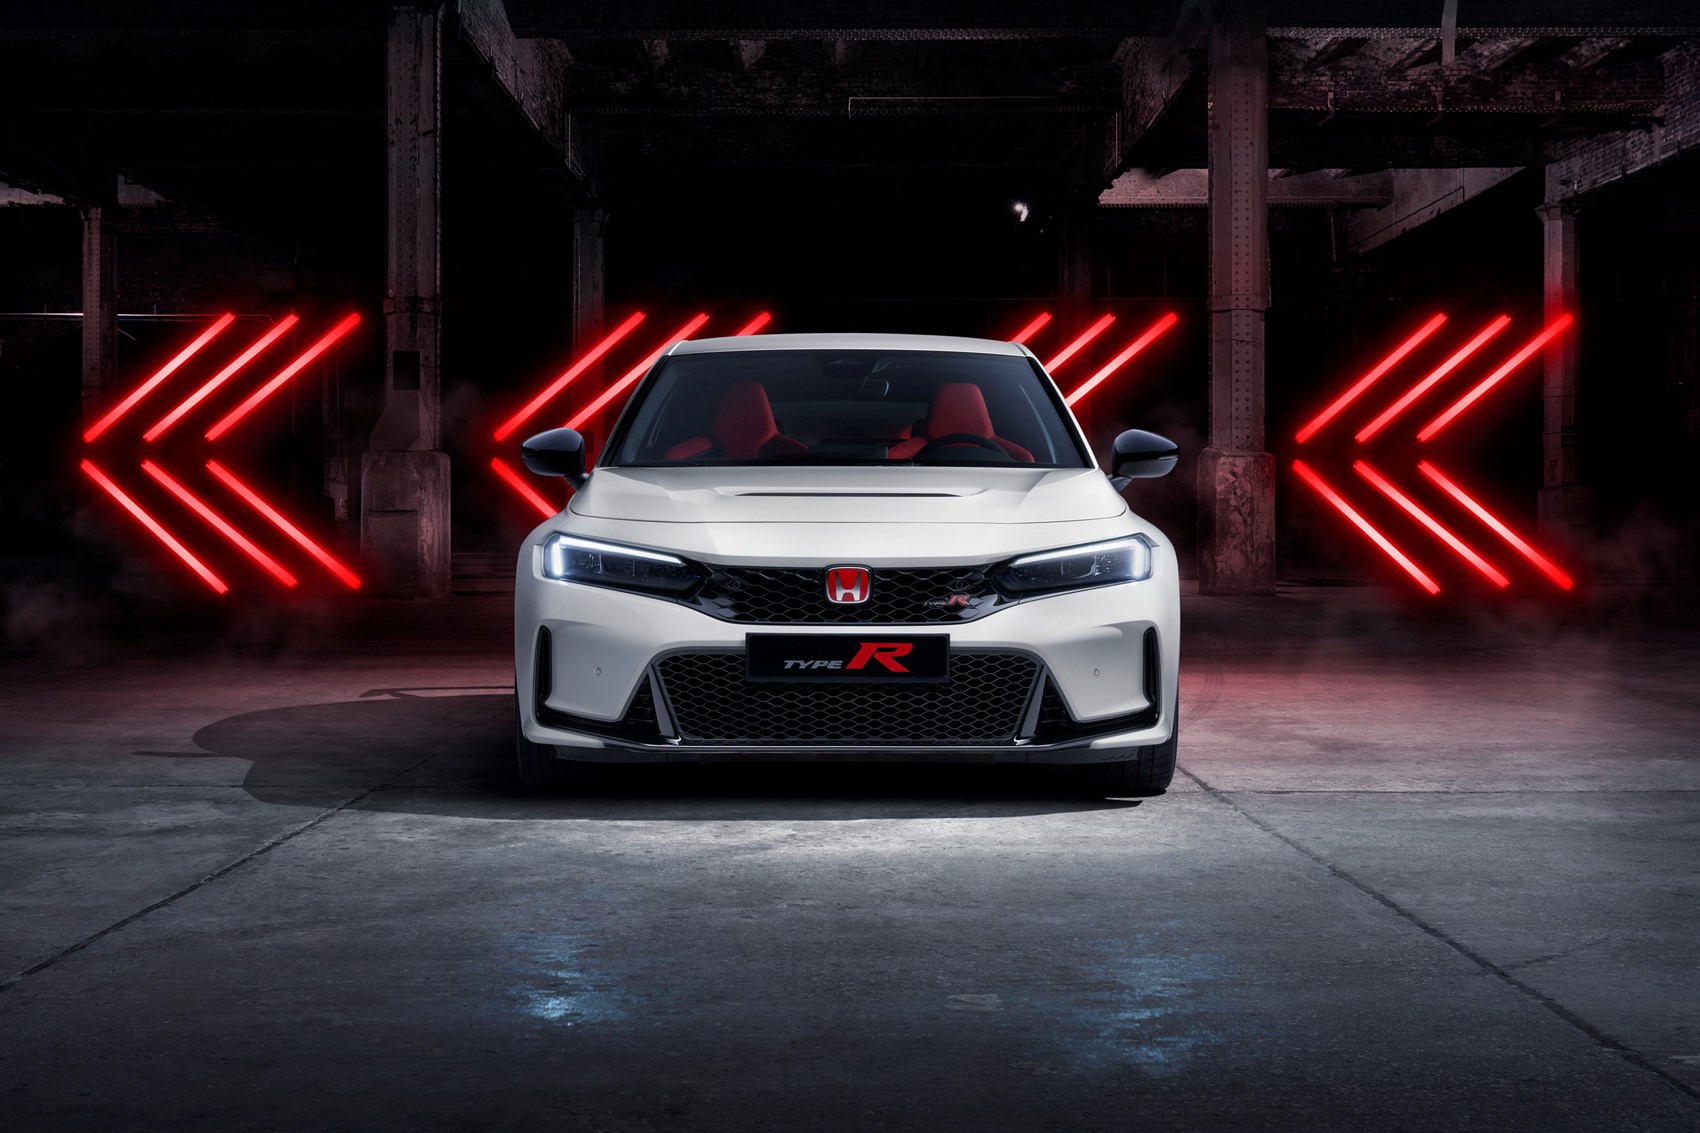 2023 Honda Civic Type R: This Is How We Think It's Going To Look